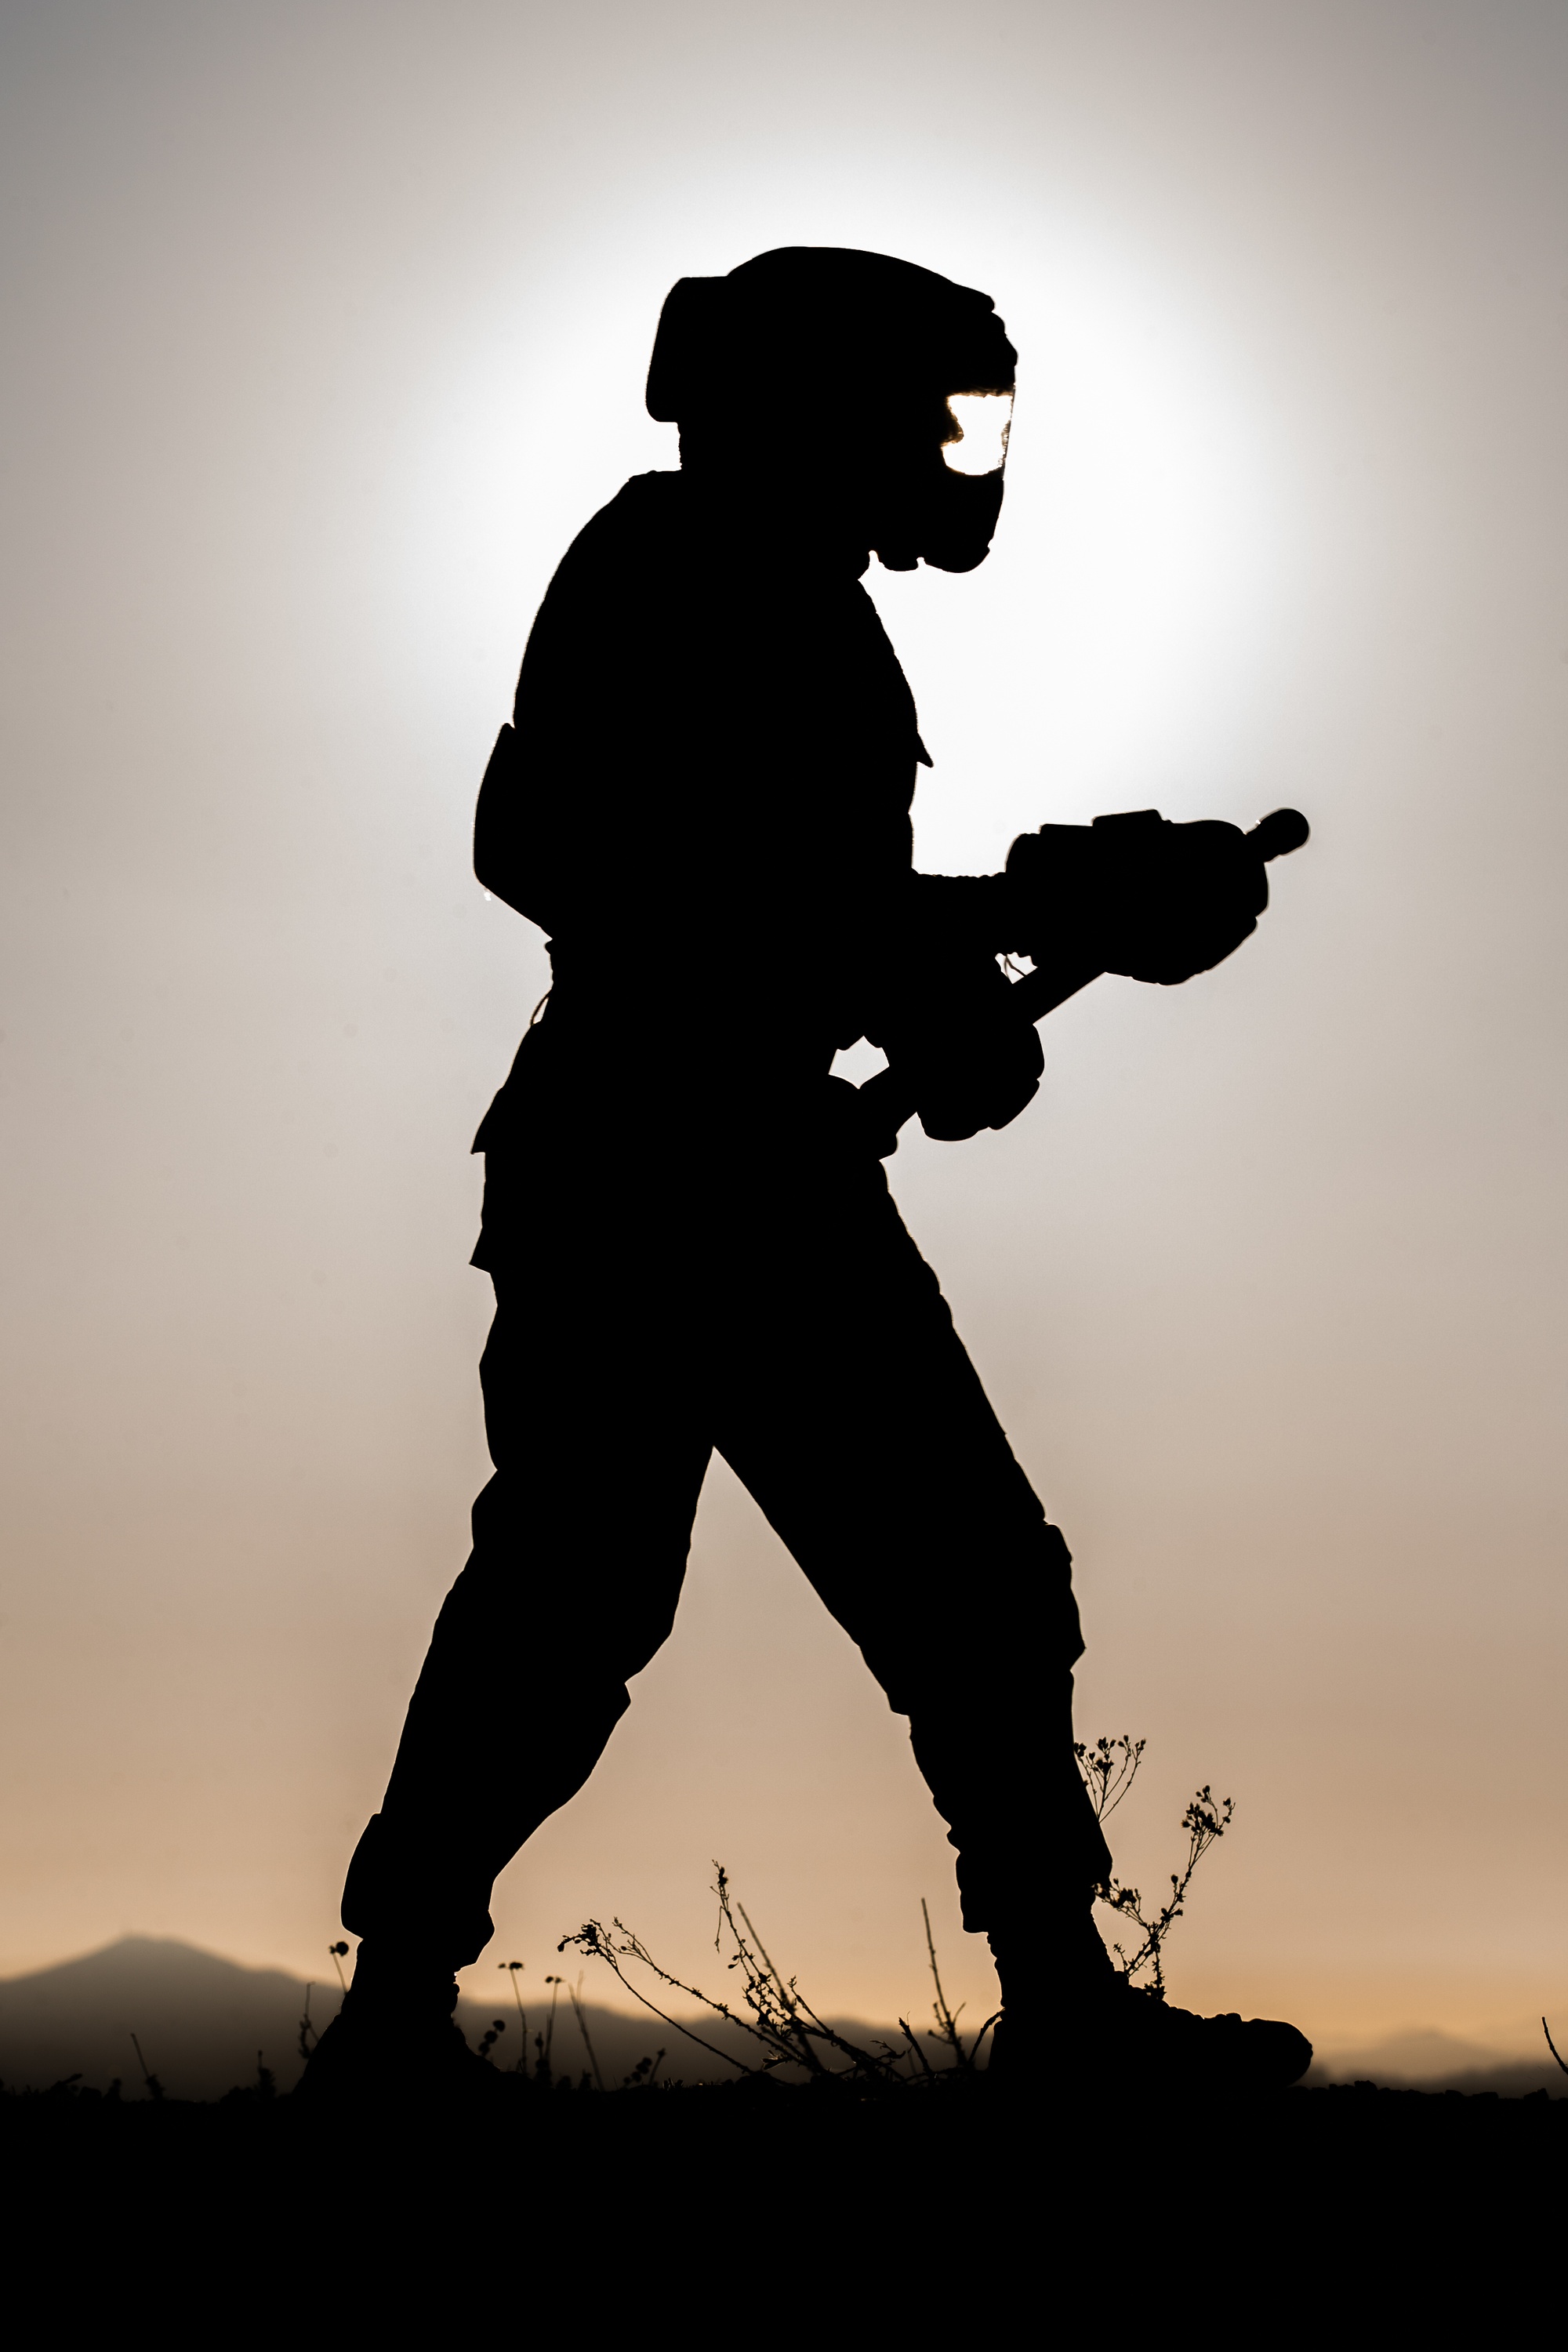 soldier carrying another soldier silhouette